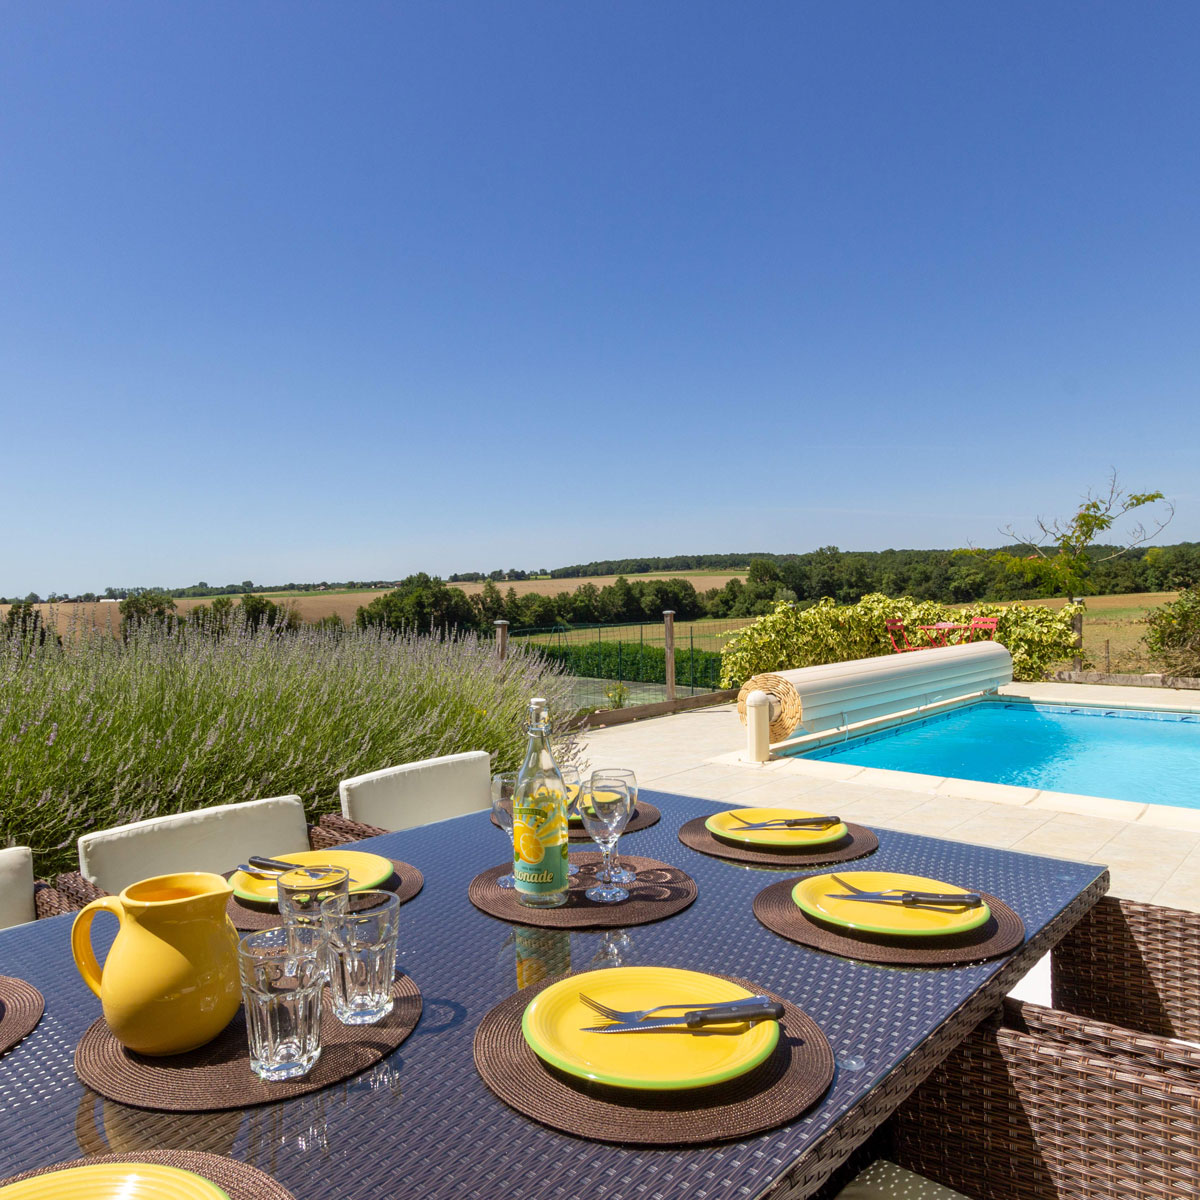 Le Rieutord holiday villa near Duras sw France, private pool and tennis court